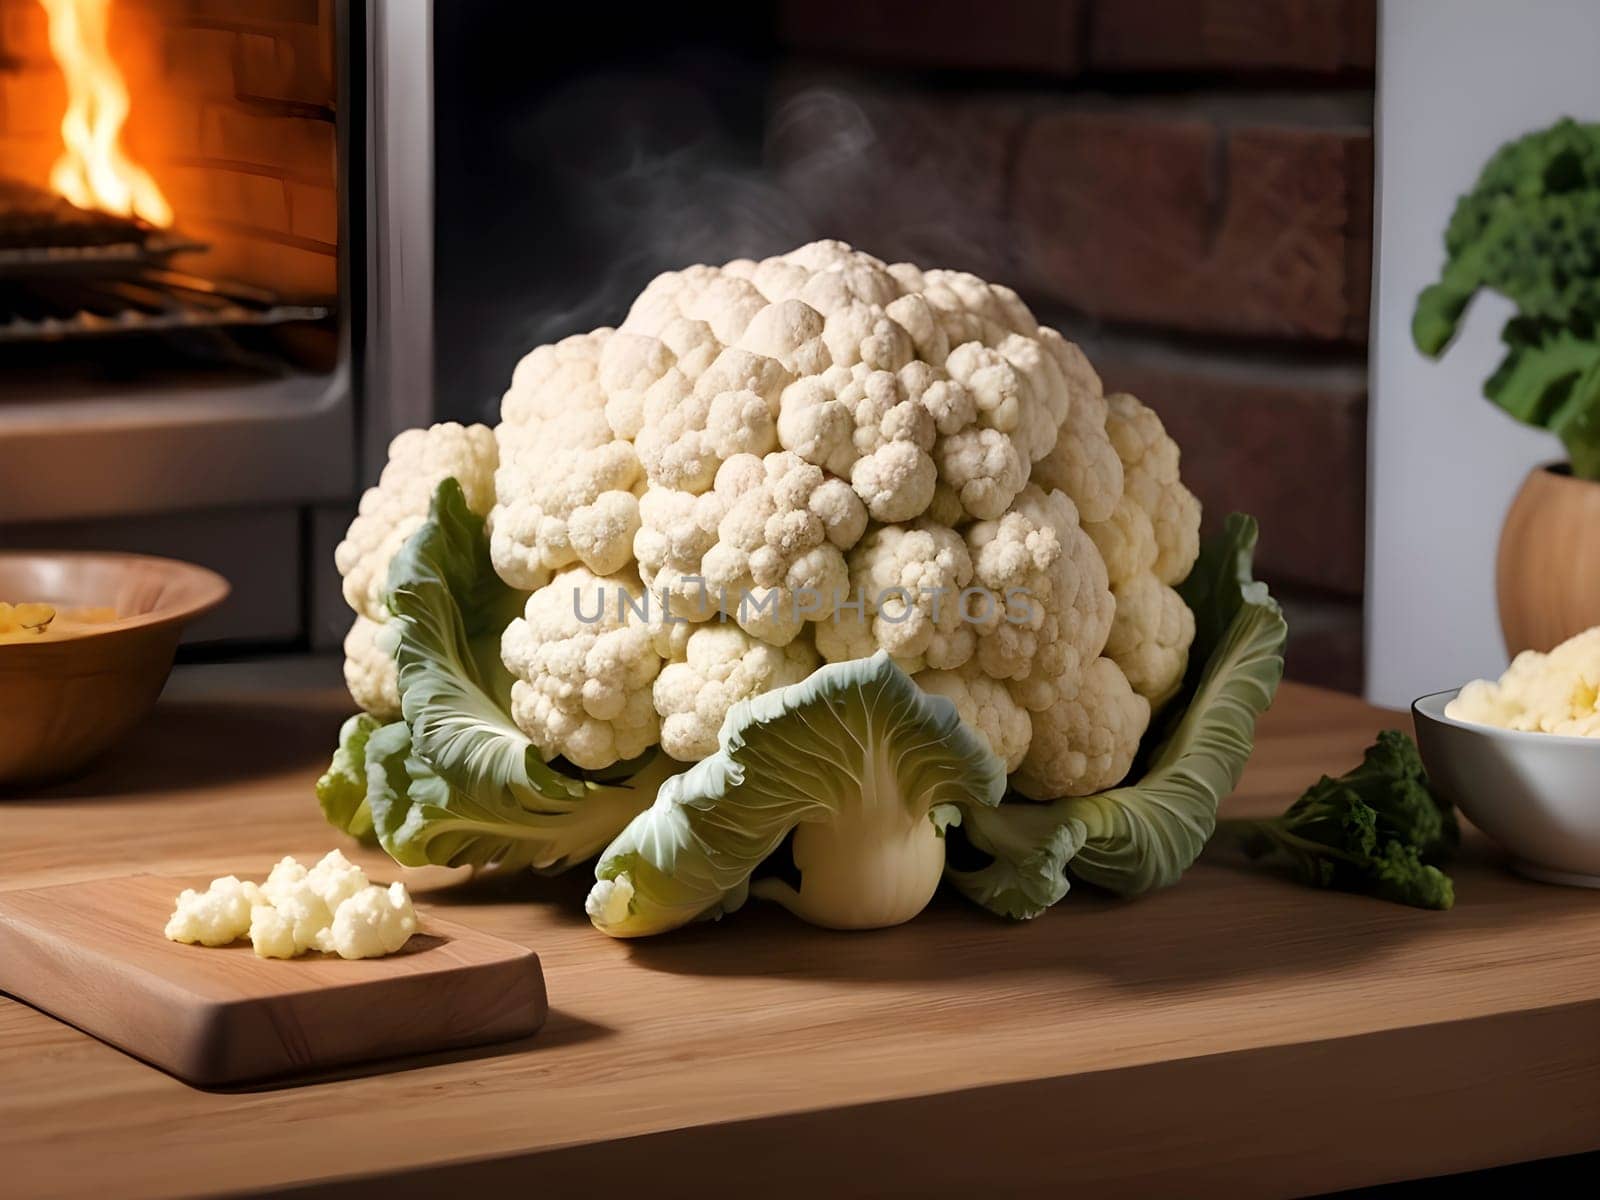 Cauliflower Comfort. Wholesome Oven-Baked Goodness on a Wooden Table.